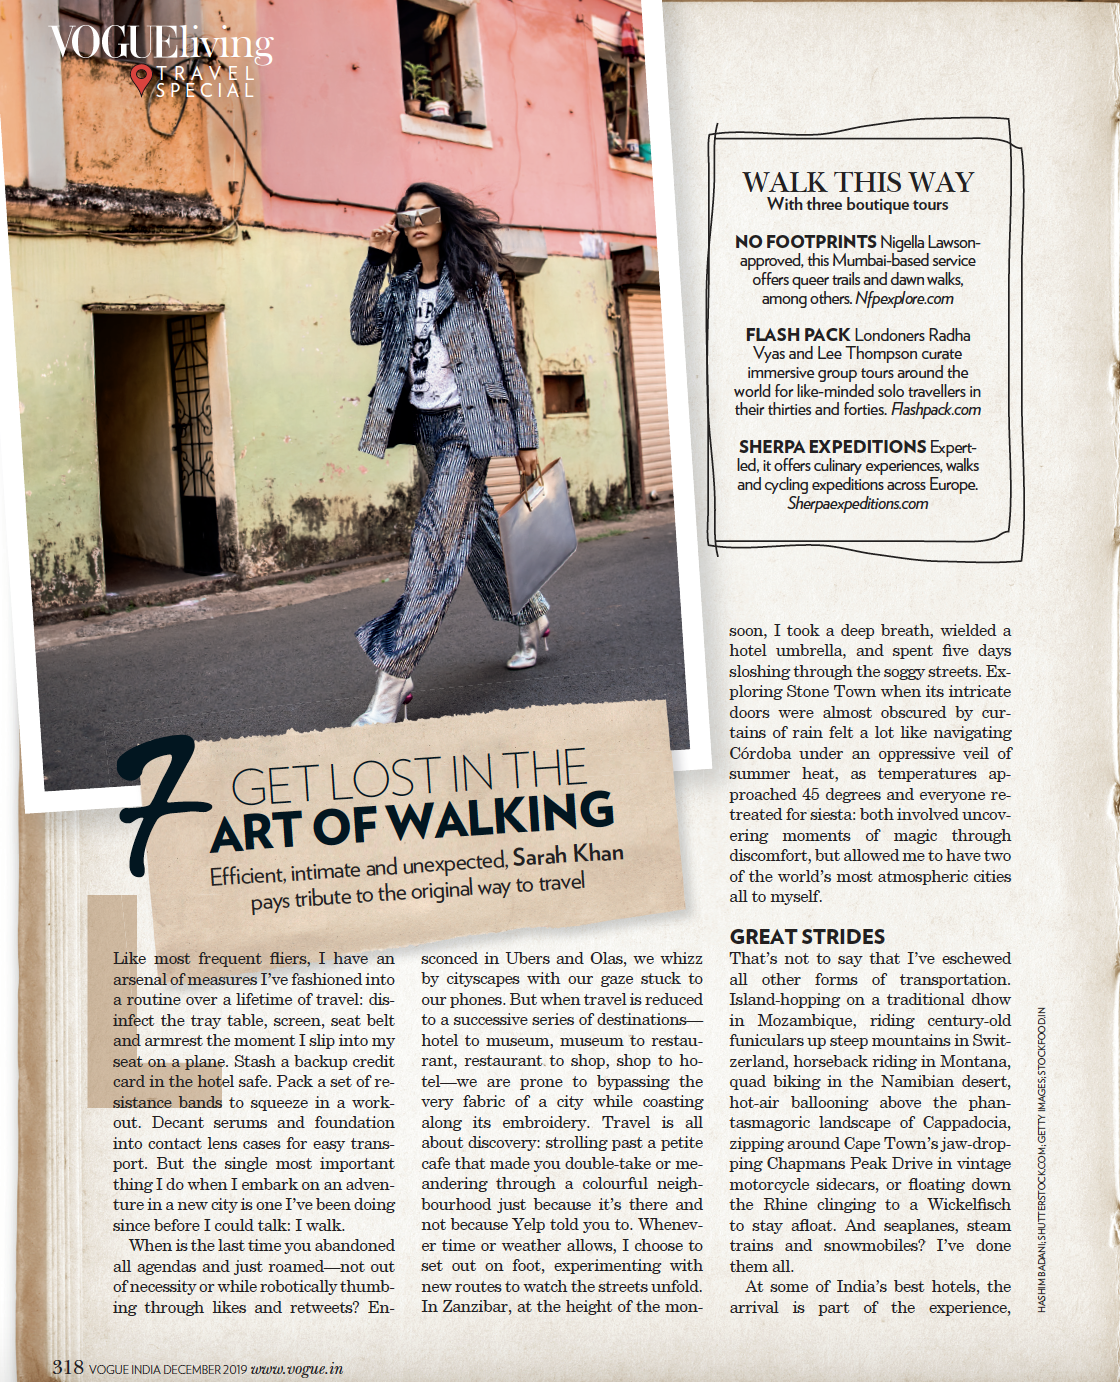 Vogue India: Get Lost in the Art of Walking